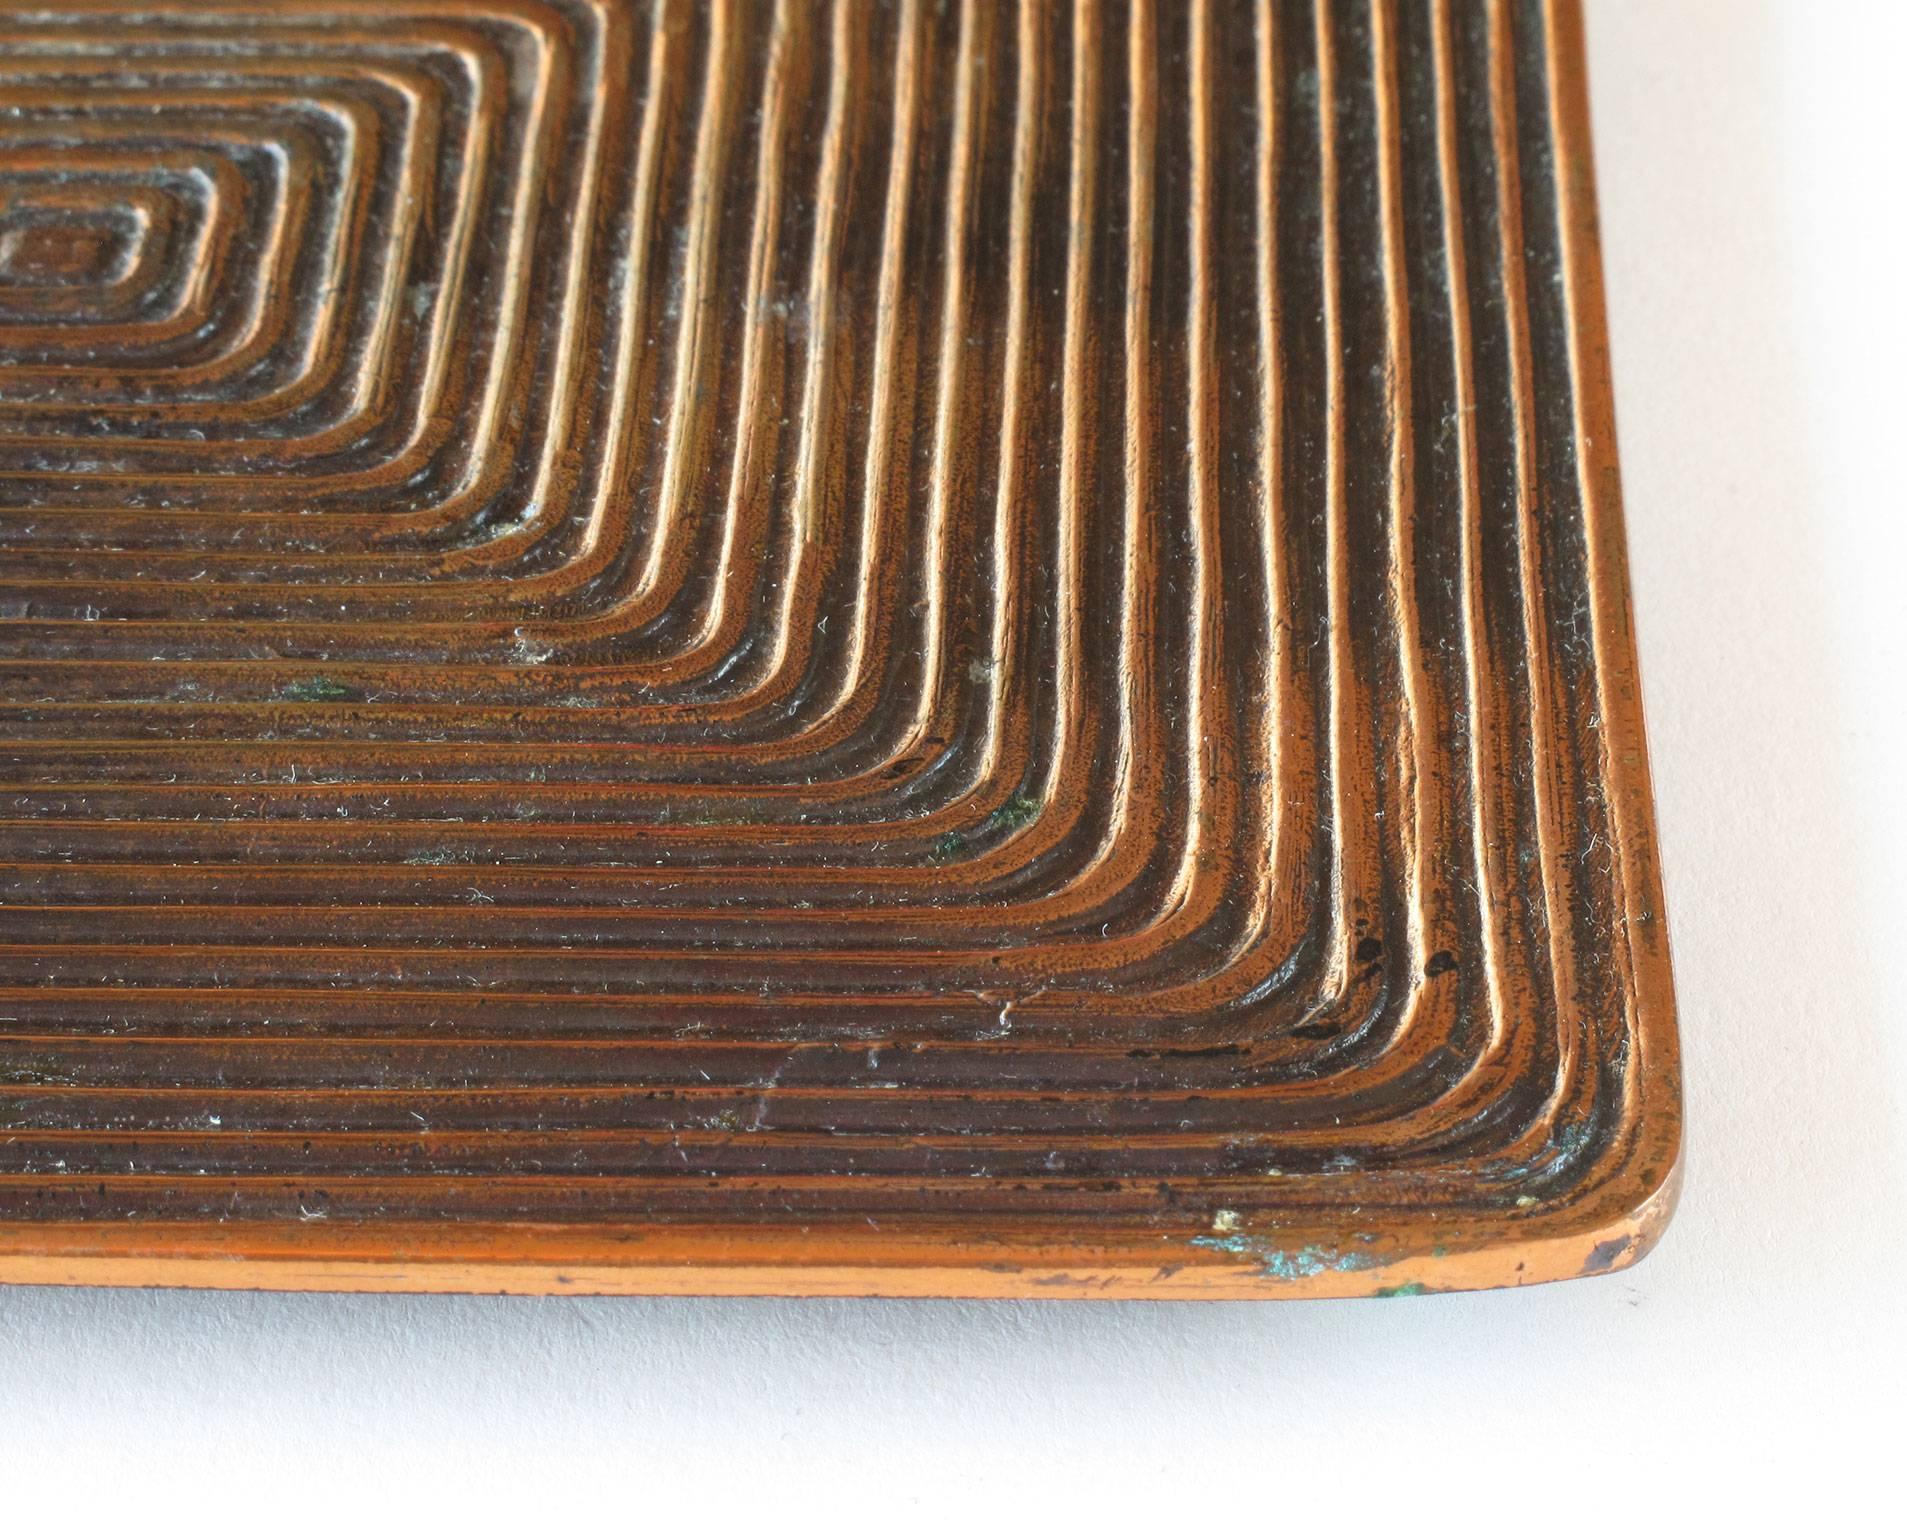 Plated Ben Seibel Square Shaped Copper Tray with Concentric Squares Design Jenfred Ware For Sale